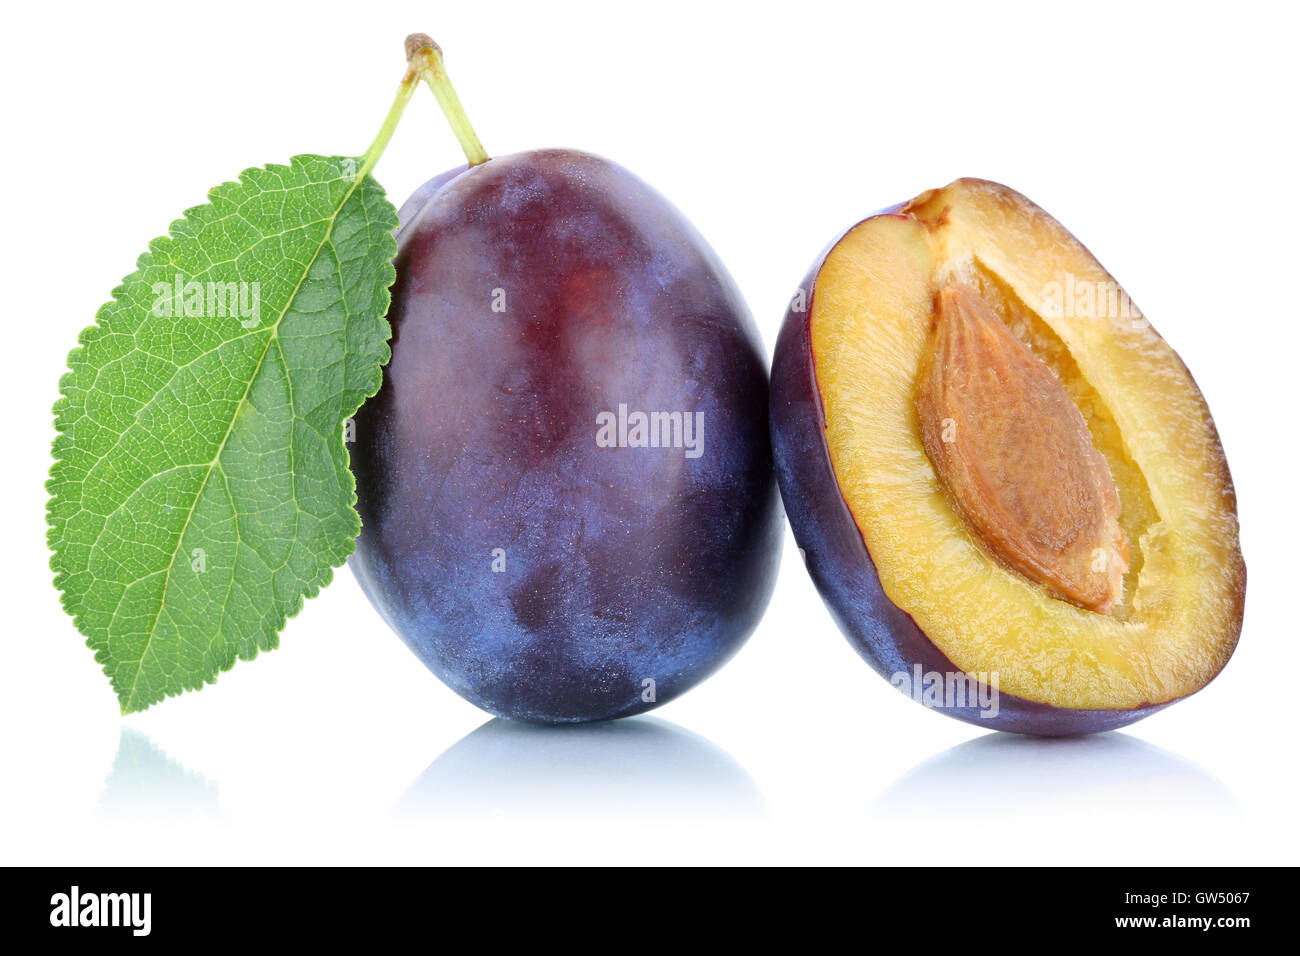 Plums plum prunes prune fruit isolated on a white background Stock Photo